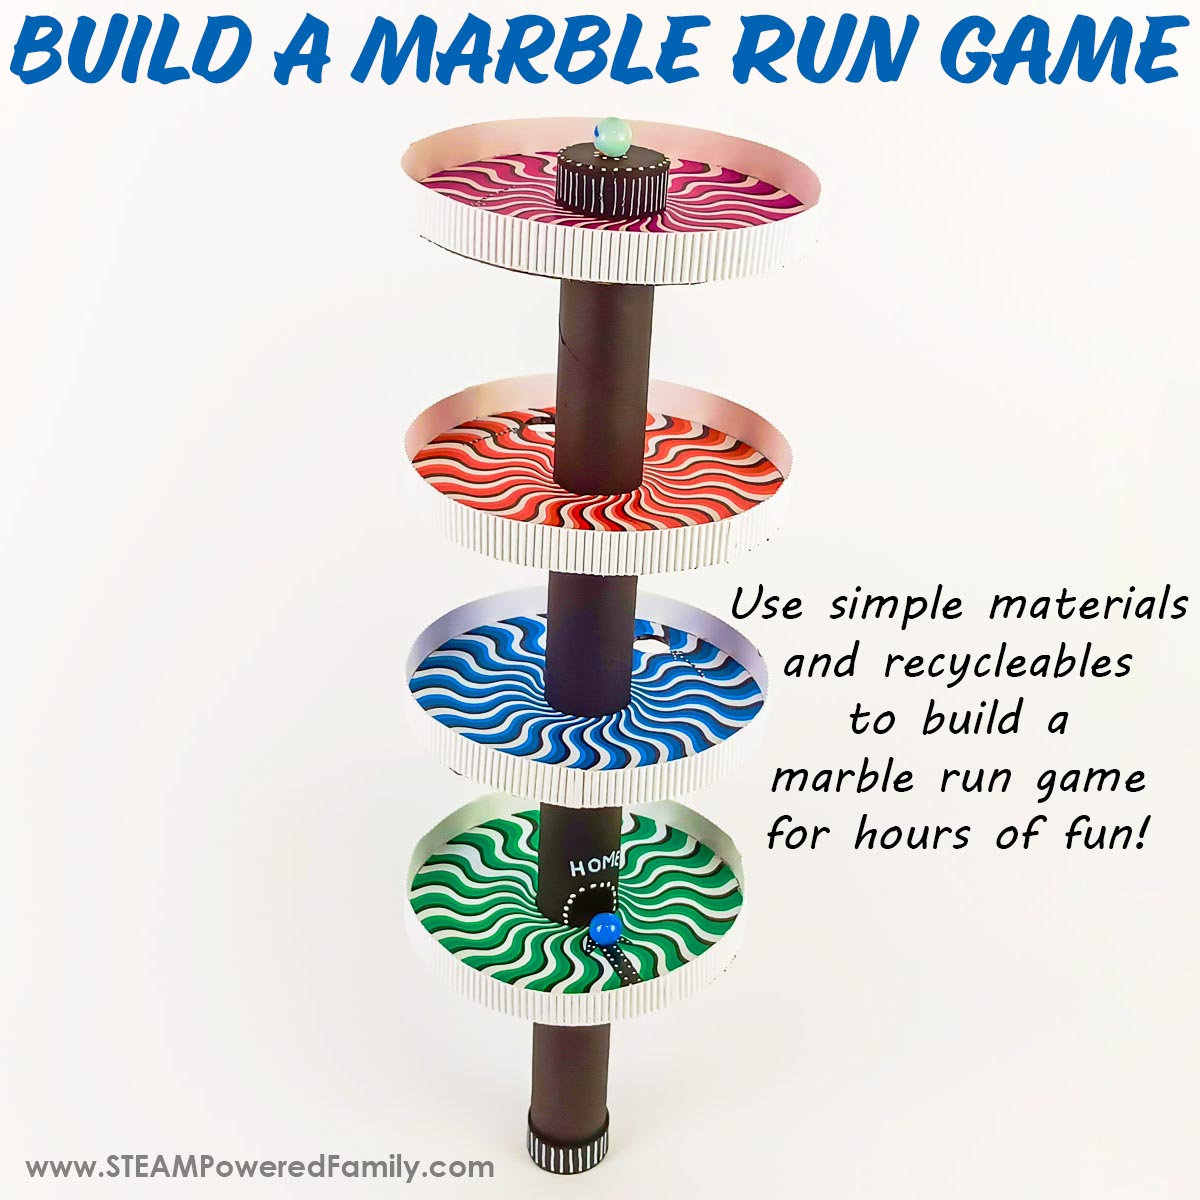 Build a Marble Run Game STEM Challenge